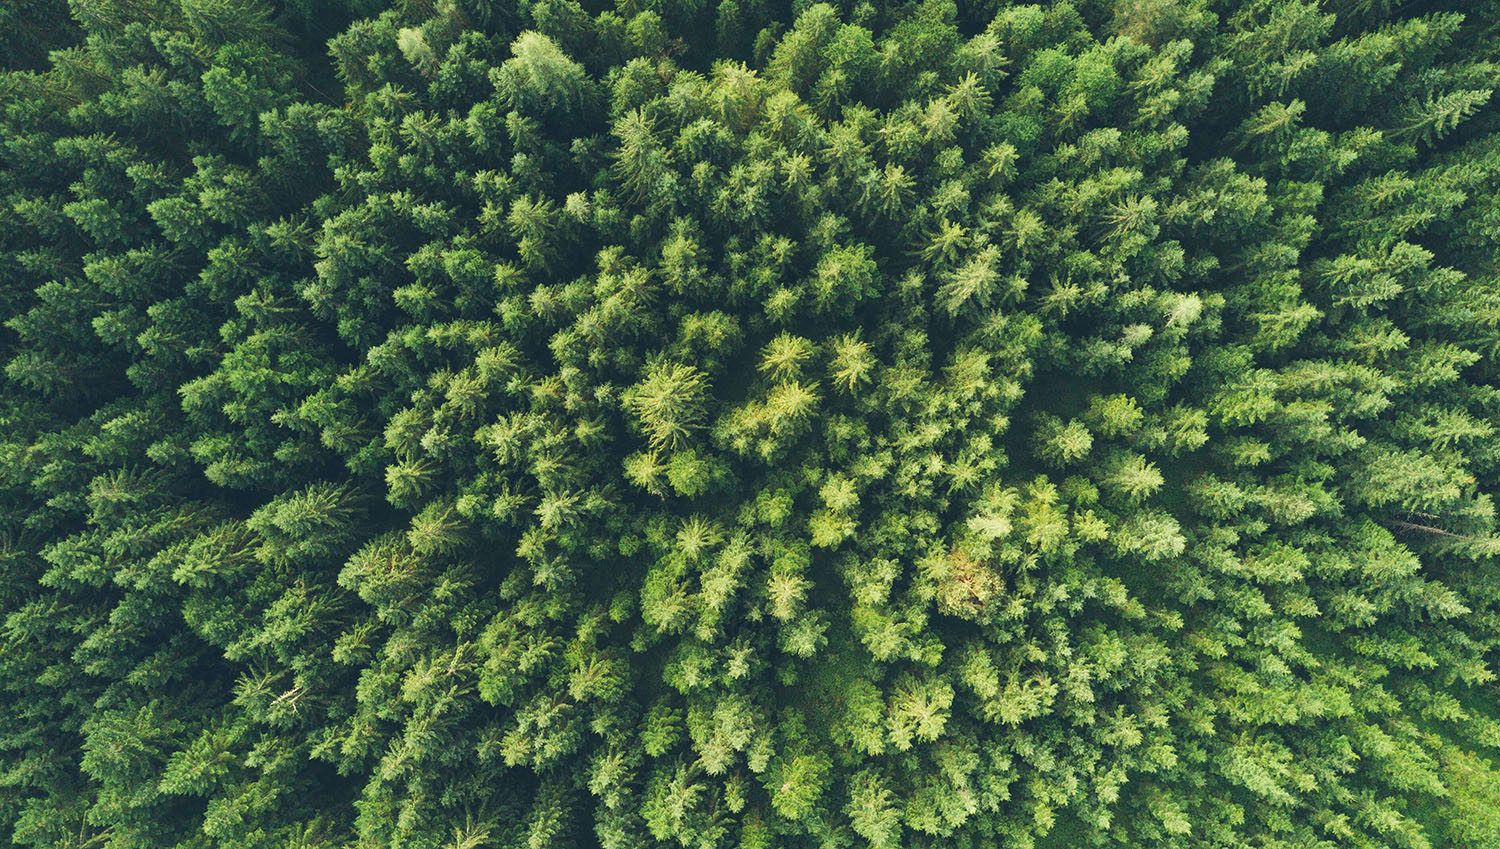 Overhead view of a dense forest